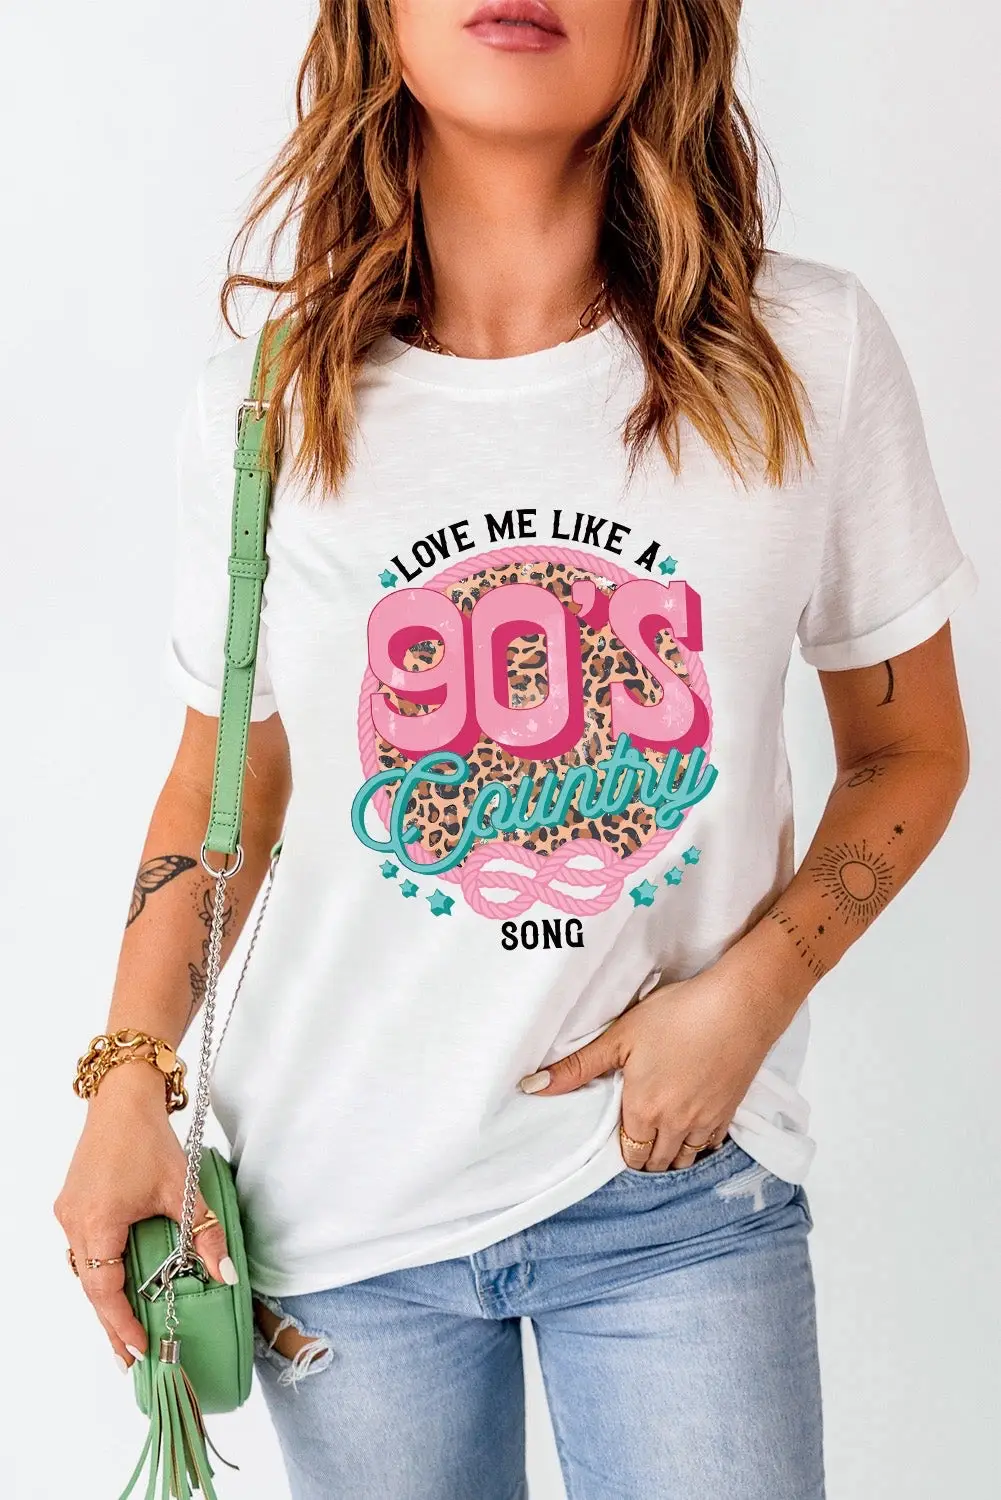 #90scountry #90sthrowback #countrymusic  https://968cec-17.myshopify.com/products/wholesale-white-love-me-like-a-90s-country-song-graphic-tee